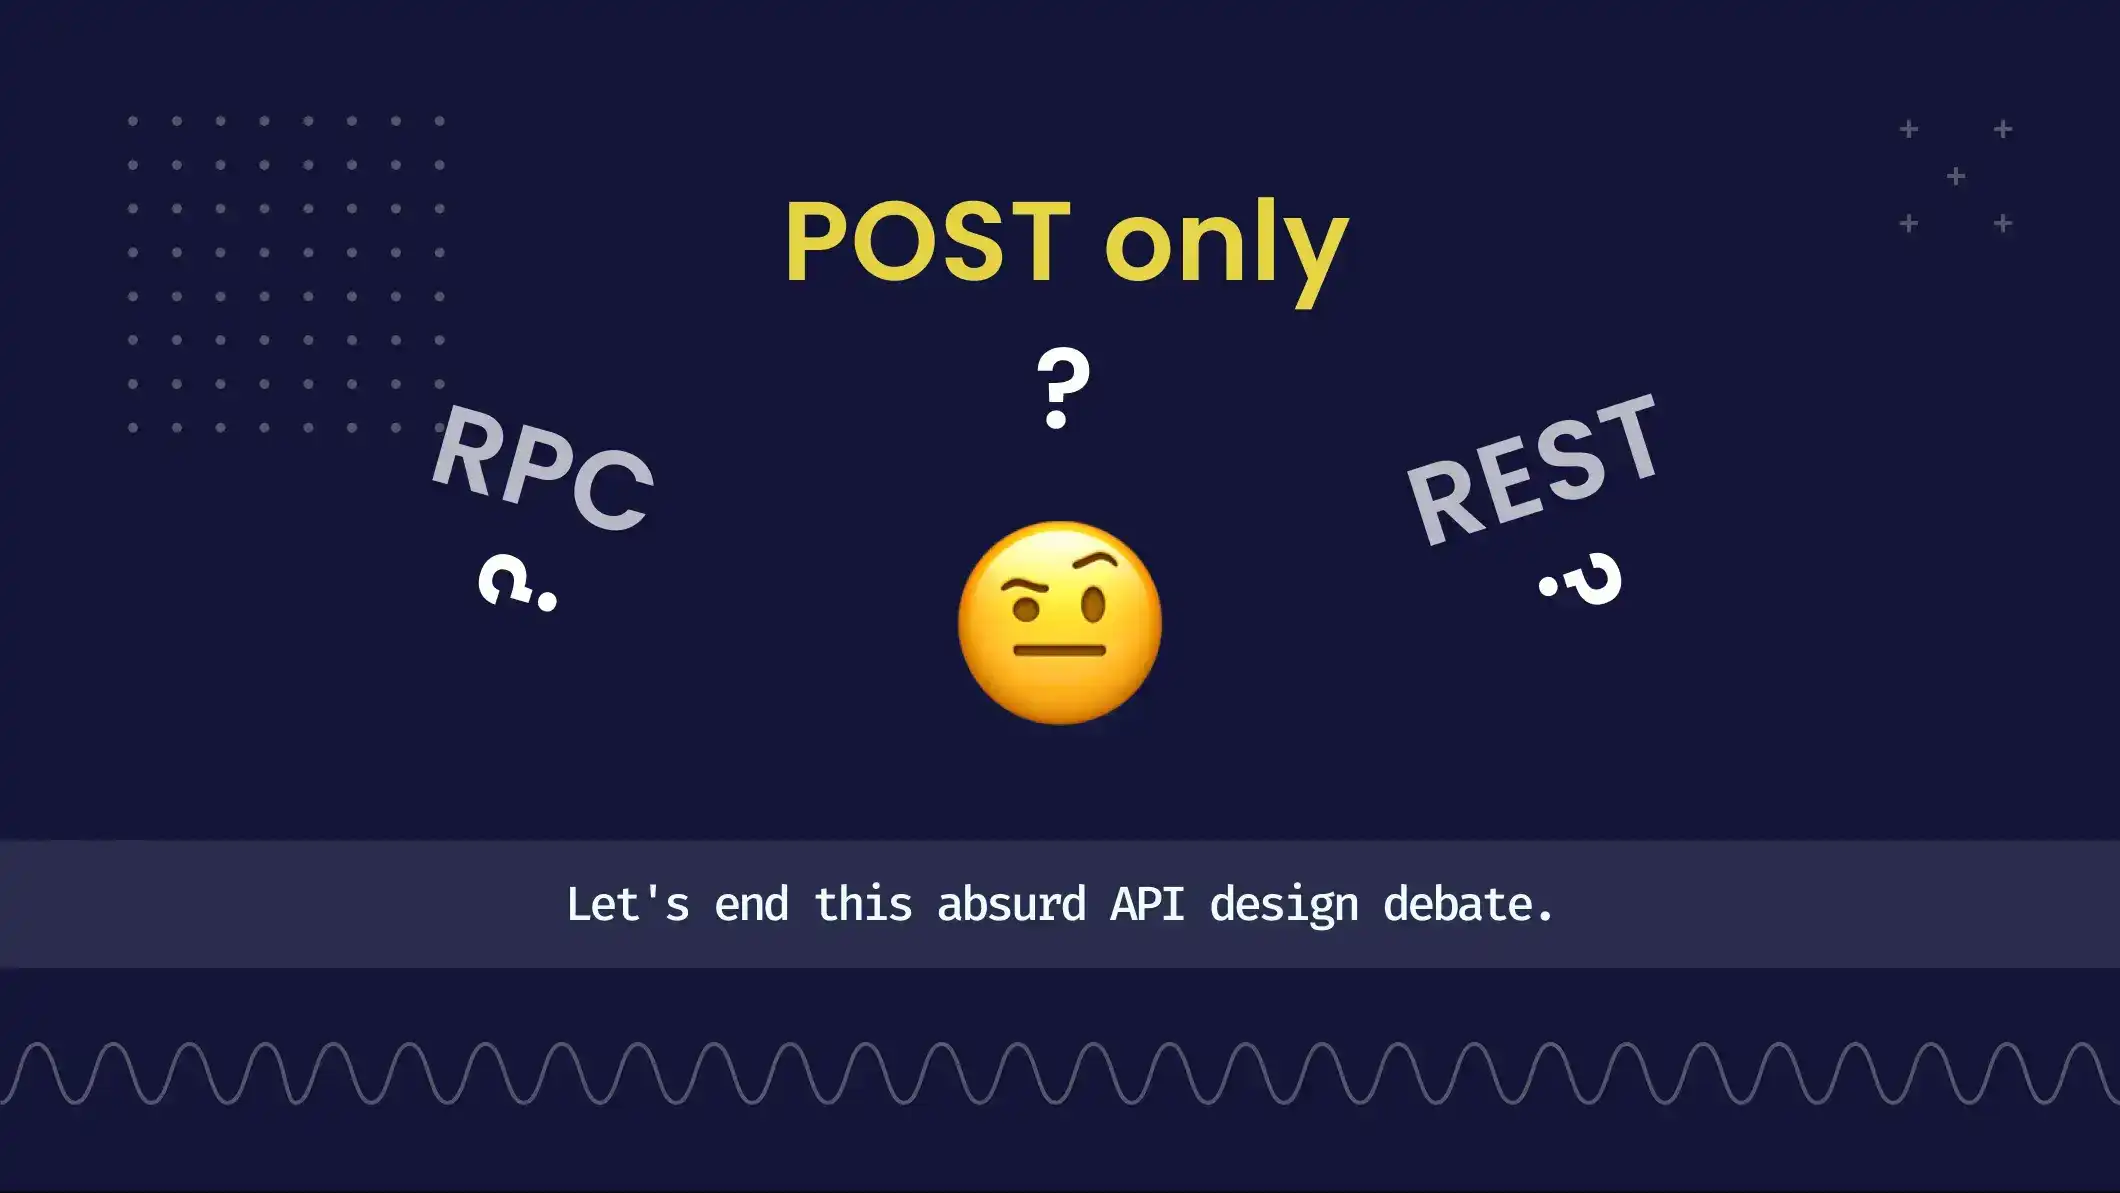 POST only? Let's end this absurd API design debate